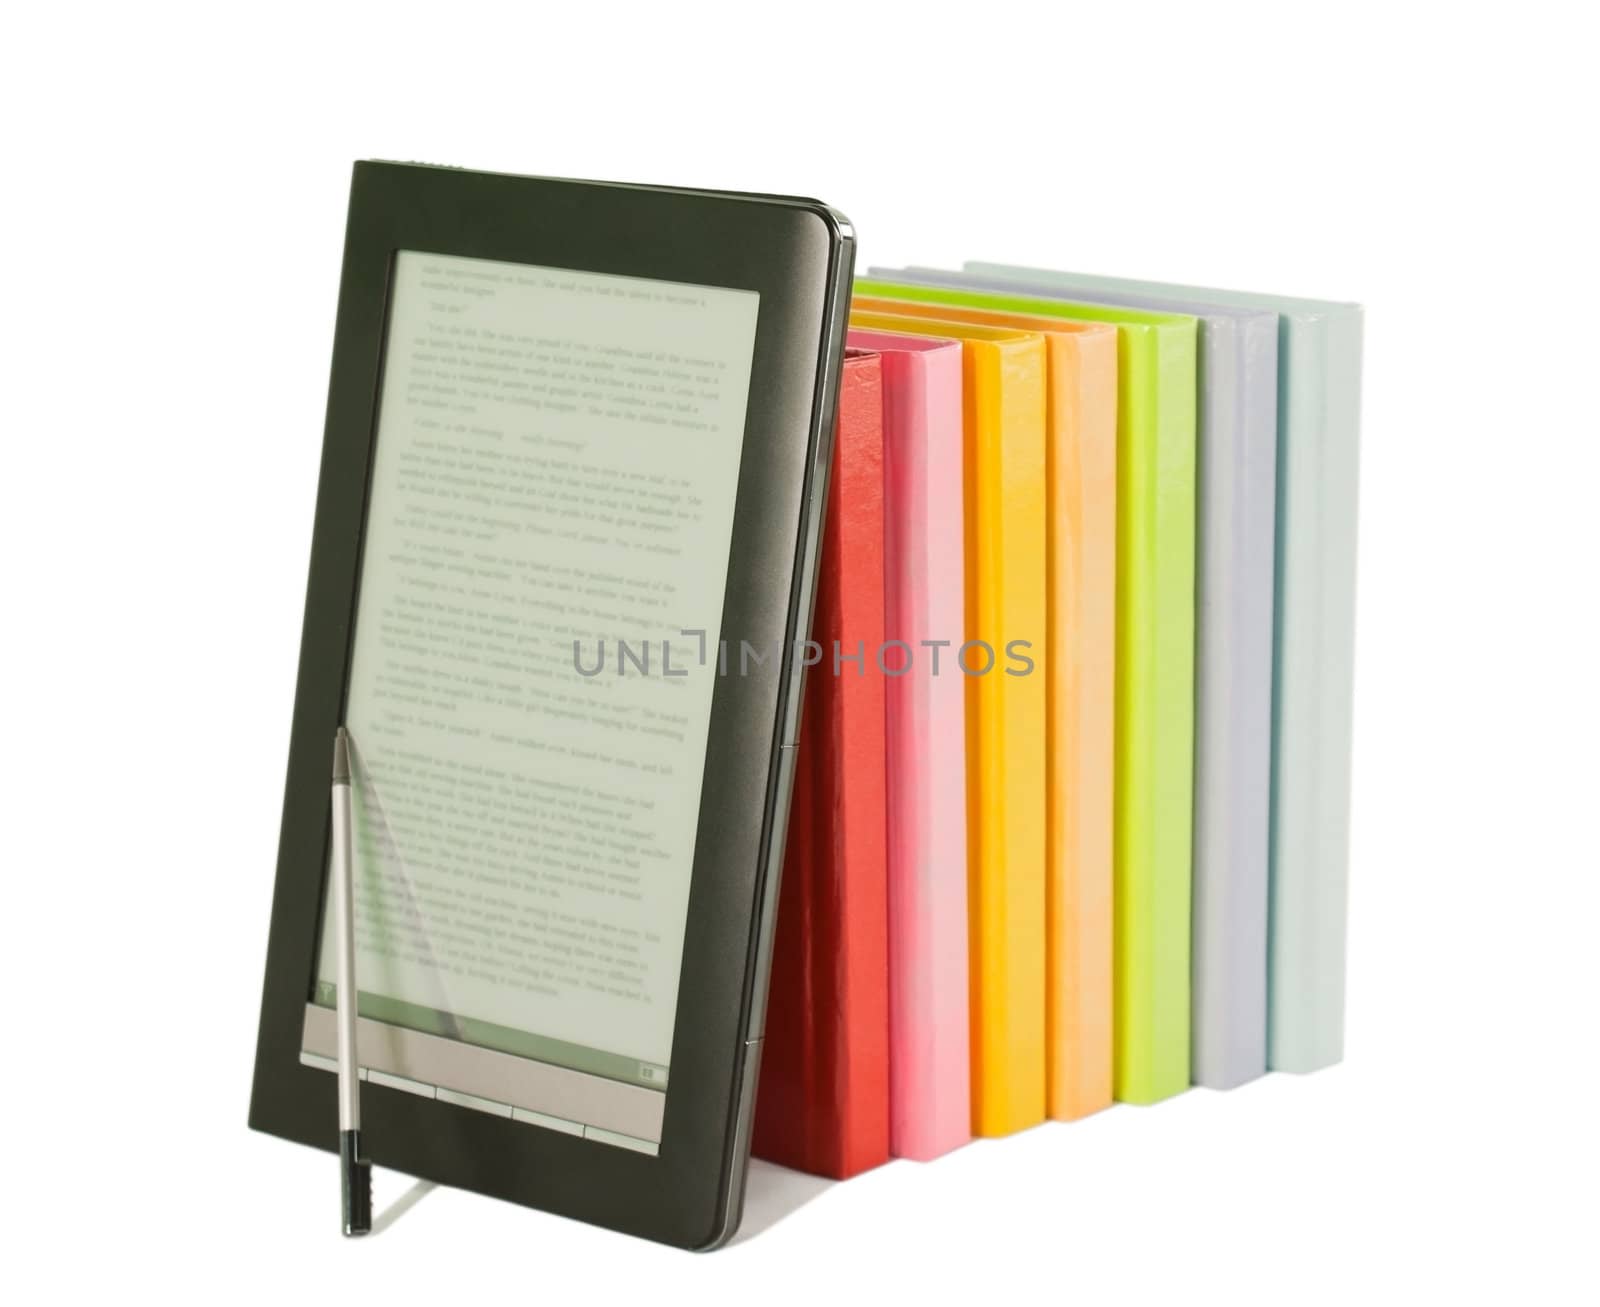 Row of colorful books and electronic book reader on the white background